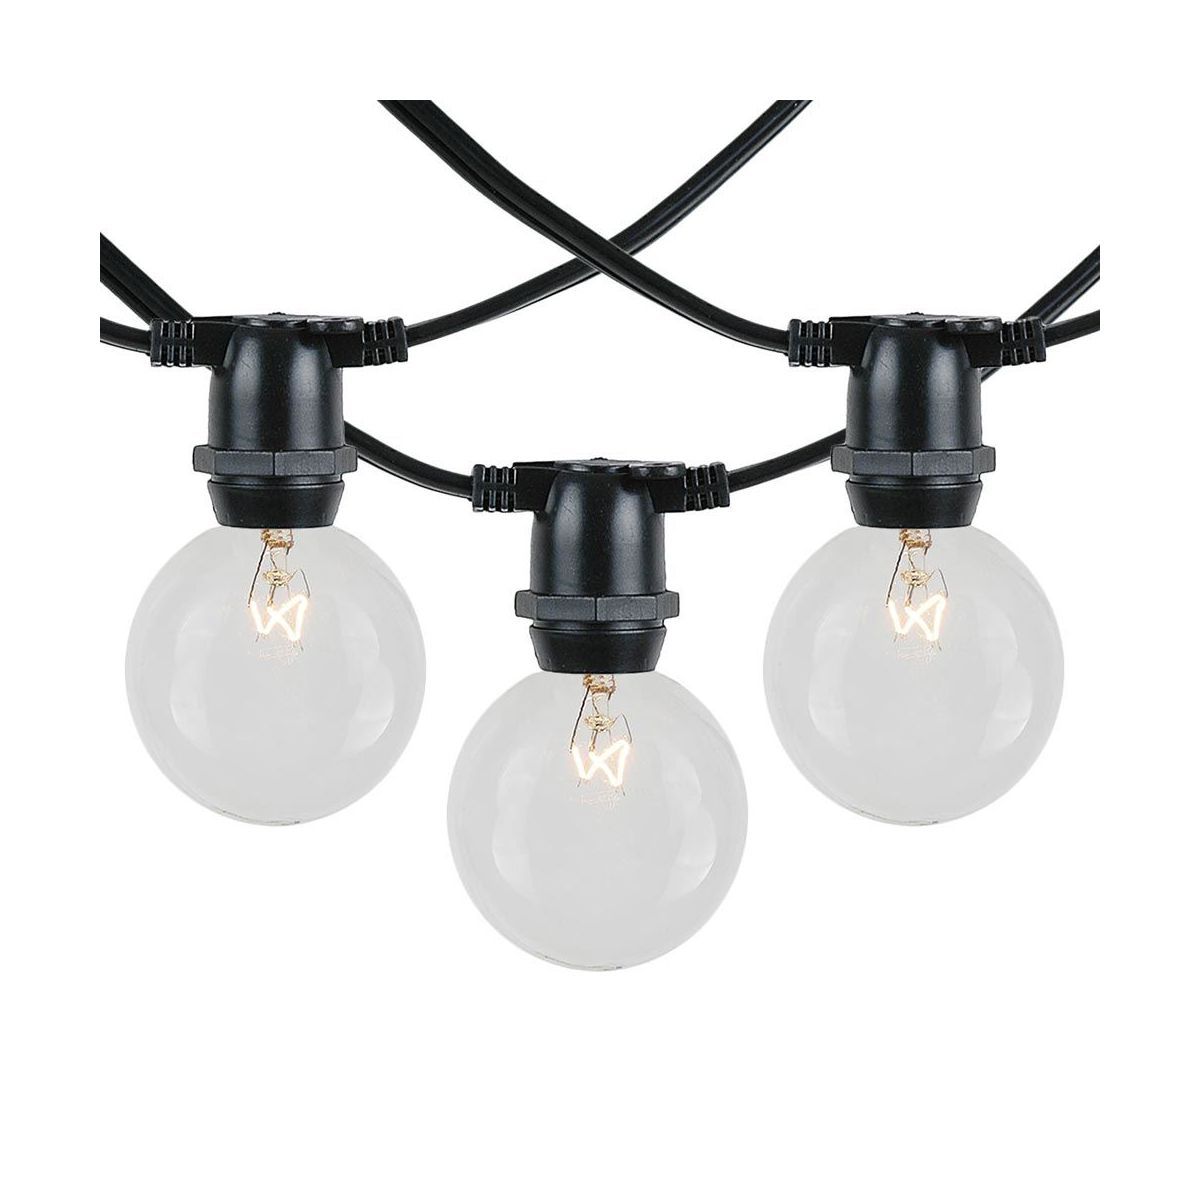 Novelty Lights Globe Outdoor String Lights with 25 In-Line Sockets Black Wire 25 Feet | Target